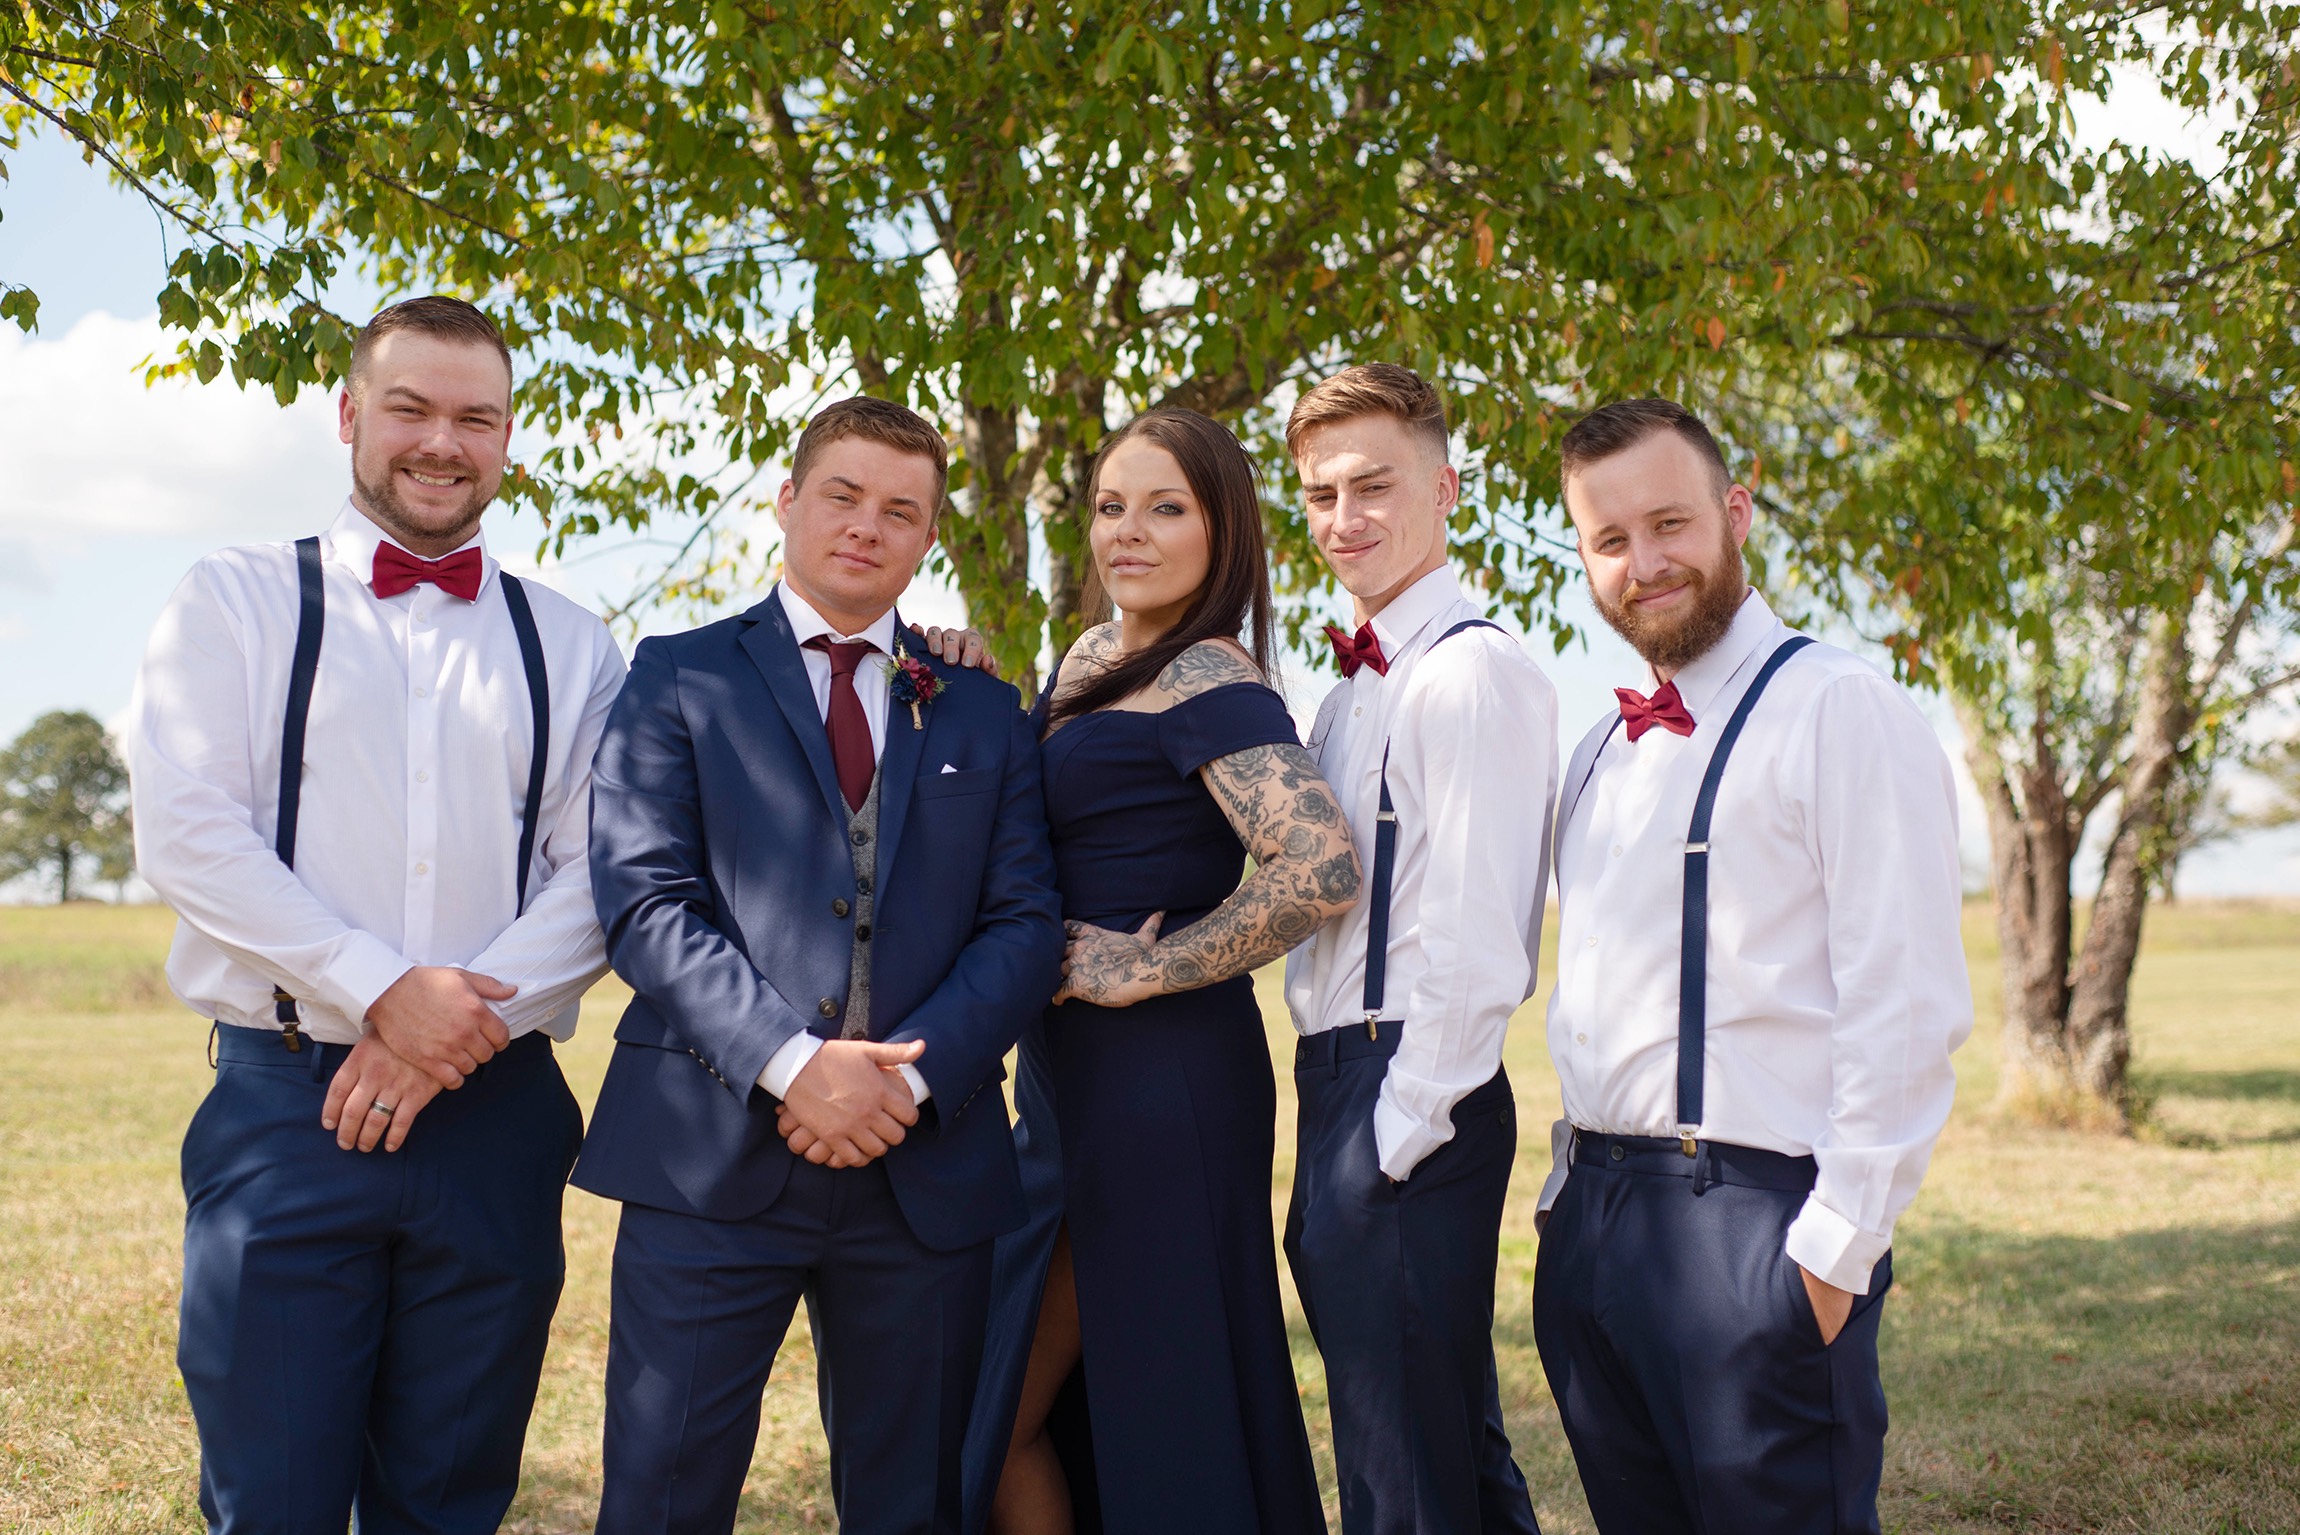 Groom in suit and tie with groomsmen and best woman.